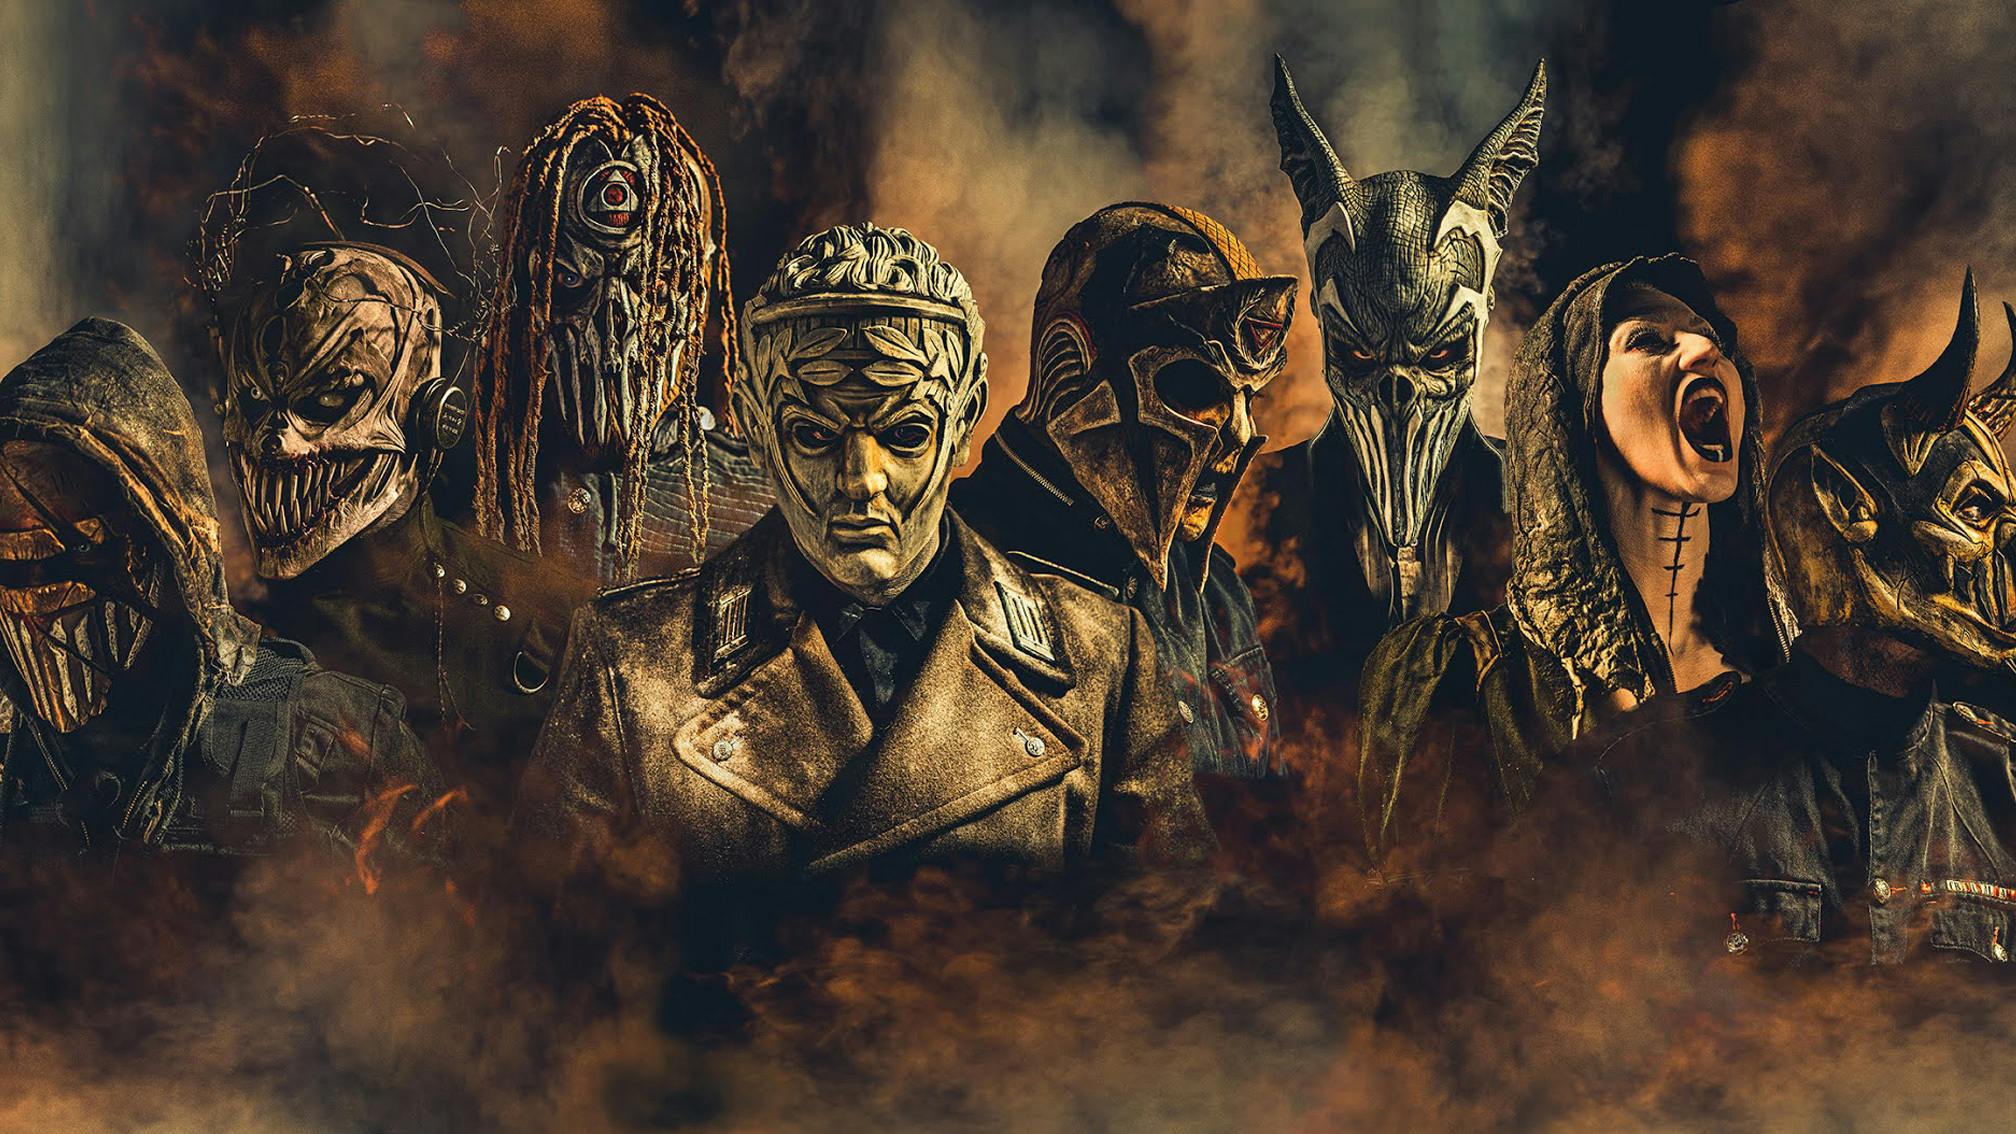 Mushroomhead On Slipknot Beef: "We Spent A Lot Of Time Complaining About Them For Nothing"